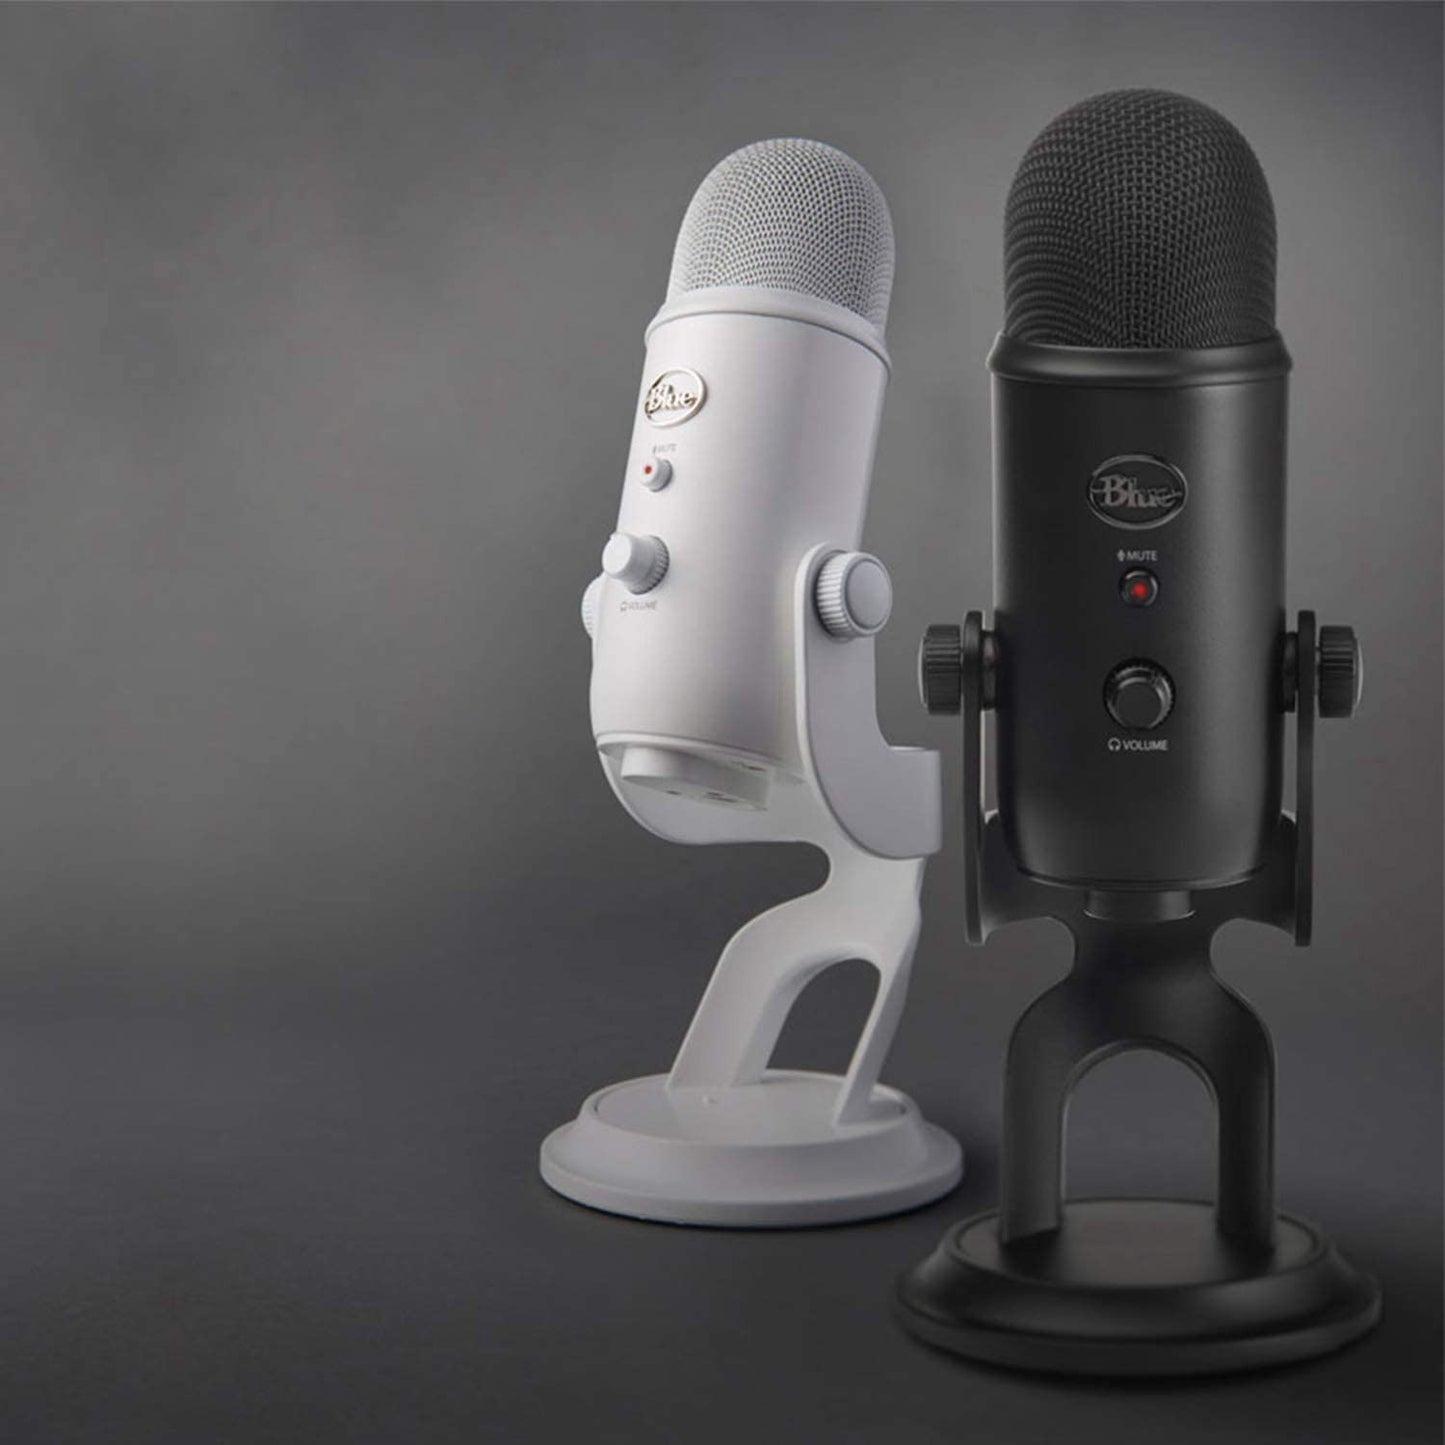 Yeti USB Microphone for Recording, Streaming, Gaming, Podcasting on PC and Mac, Condenser Mic for Laptop or Computer with  VO!CE Effects, Adjustable Stand, Plug and Play - Slate